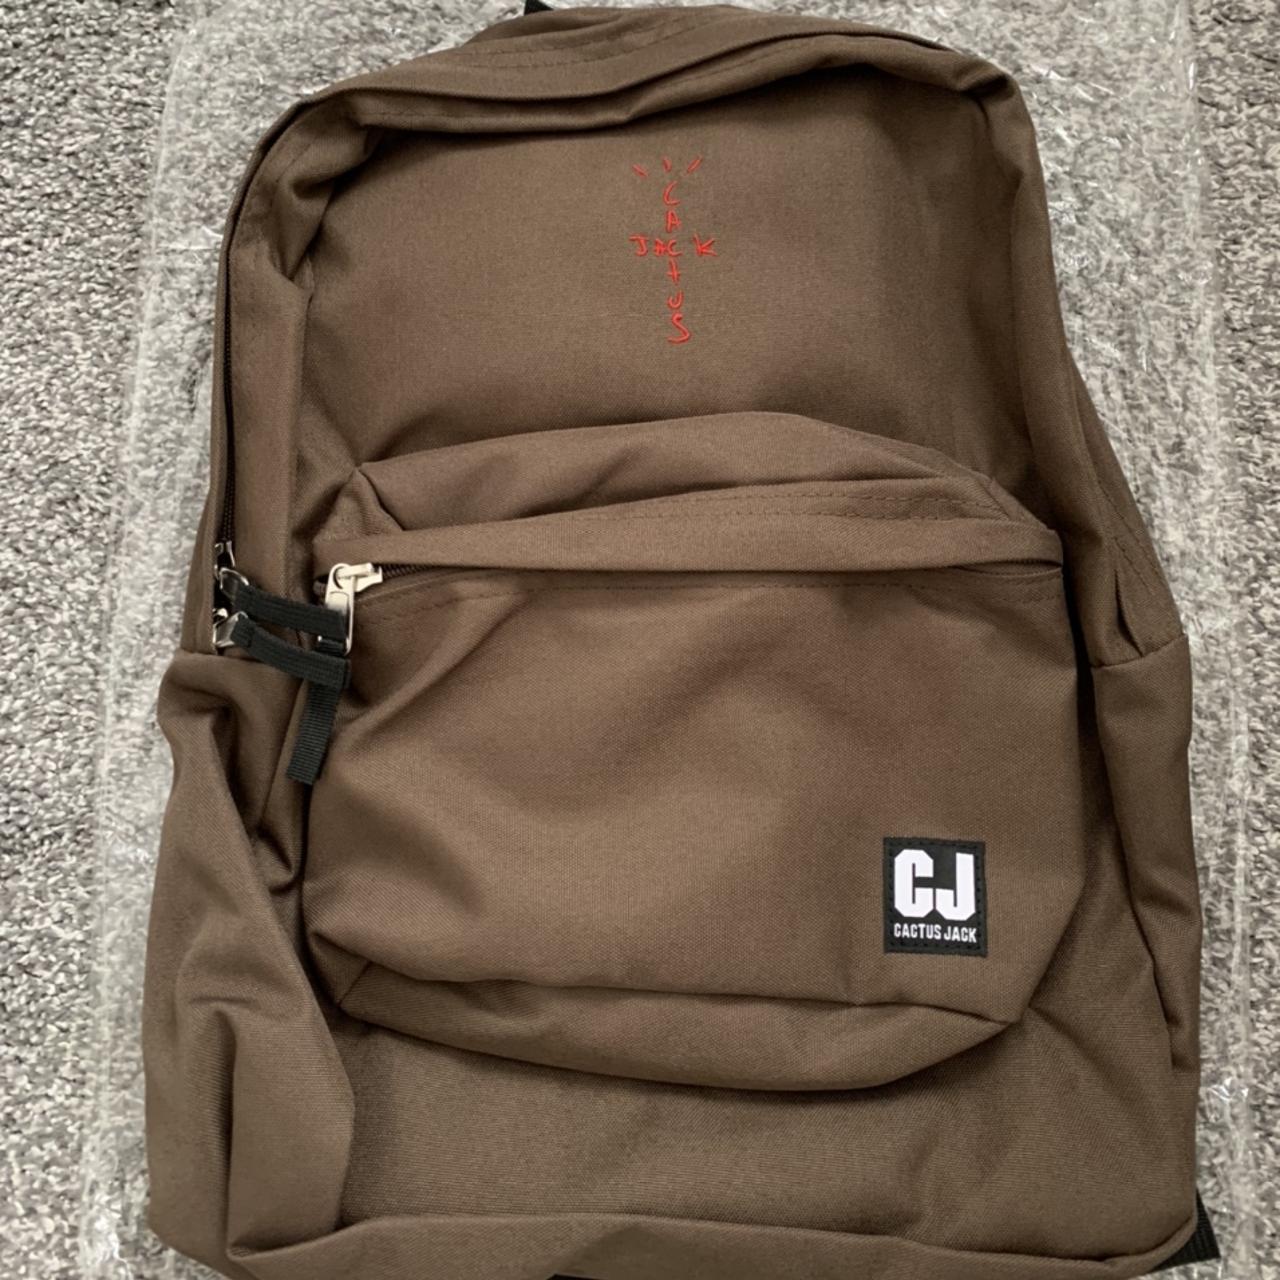 Travis Scott cactus jack backpack from the for ite - Depop